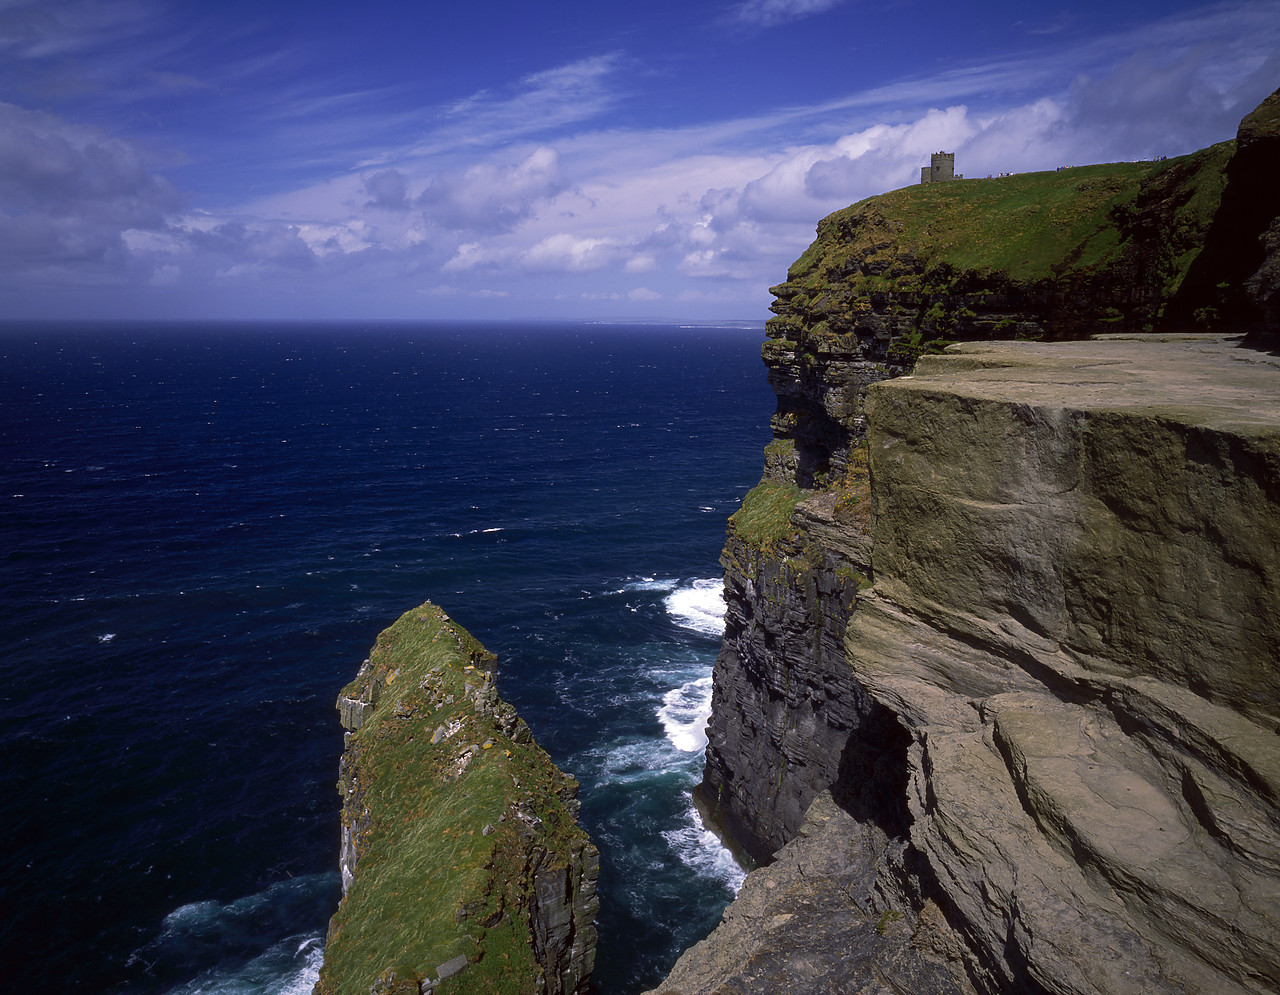 #902921-1 - Cliffs of Moher, Co. Clare, Ireland